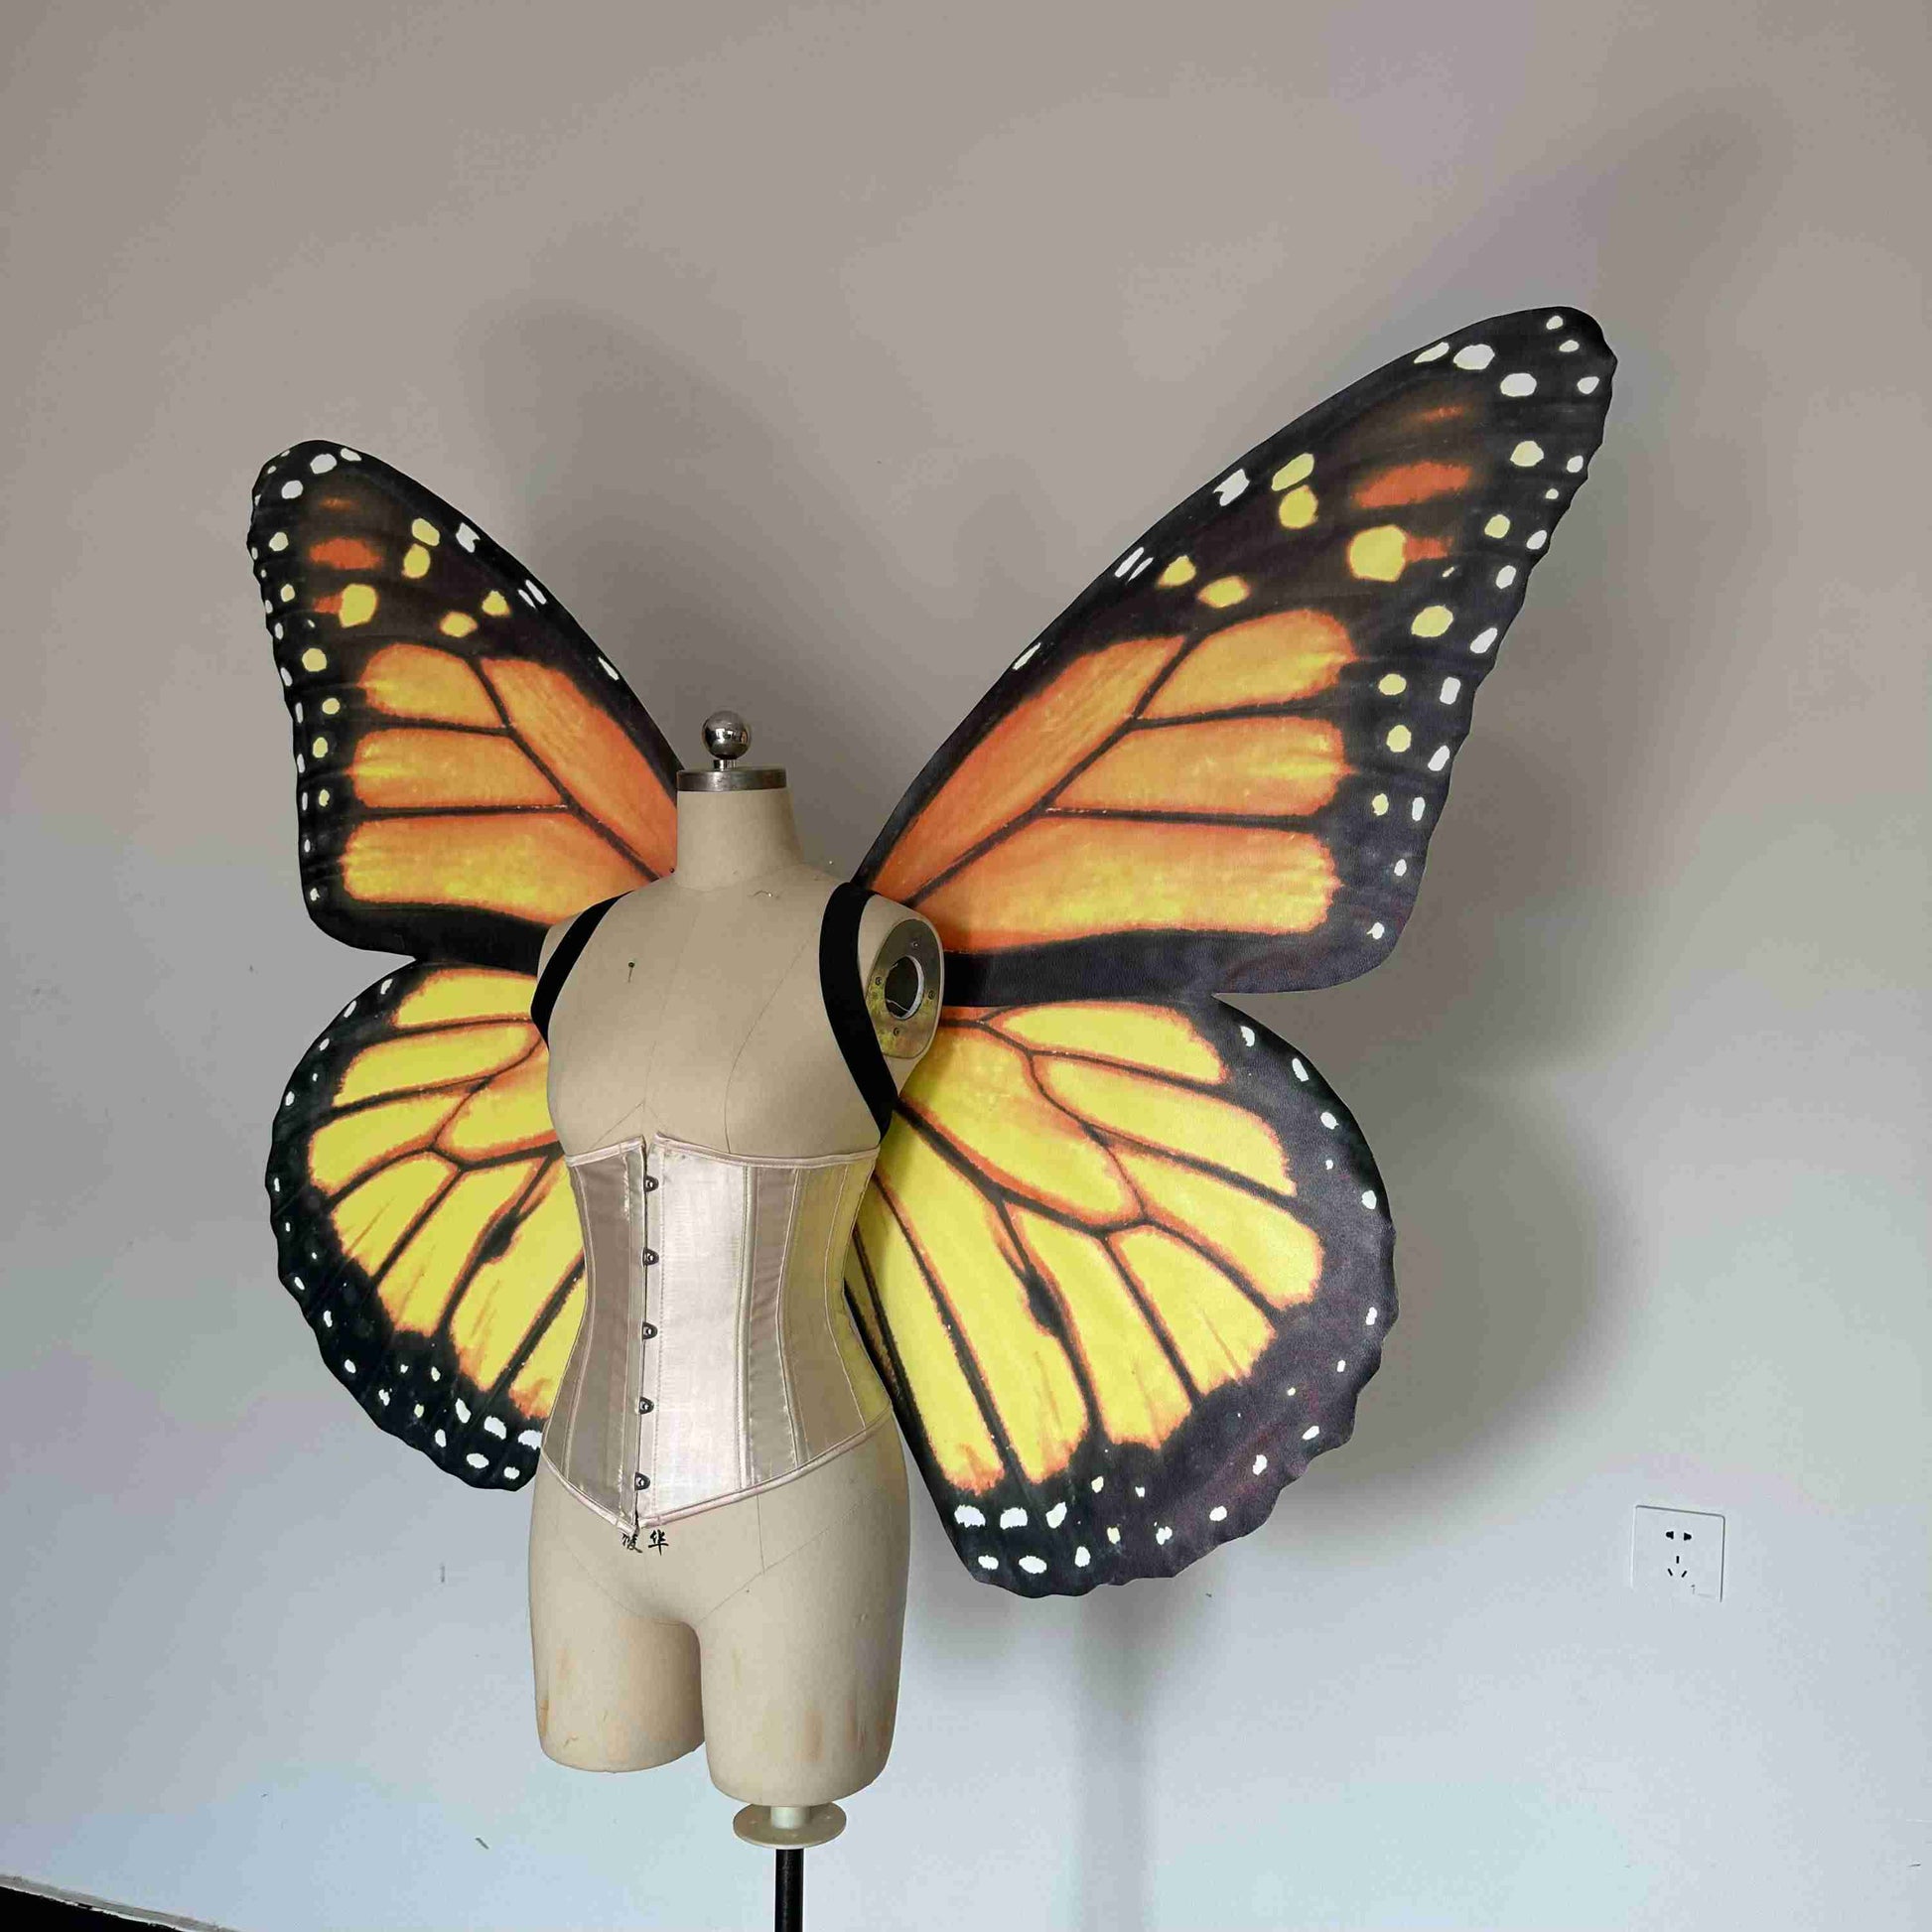 Our yellow black butterfly wings from the left side. Made from cloth. Can be also named fairy wings or pixie wings.